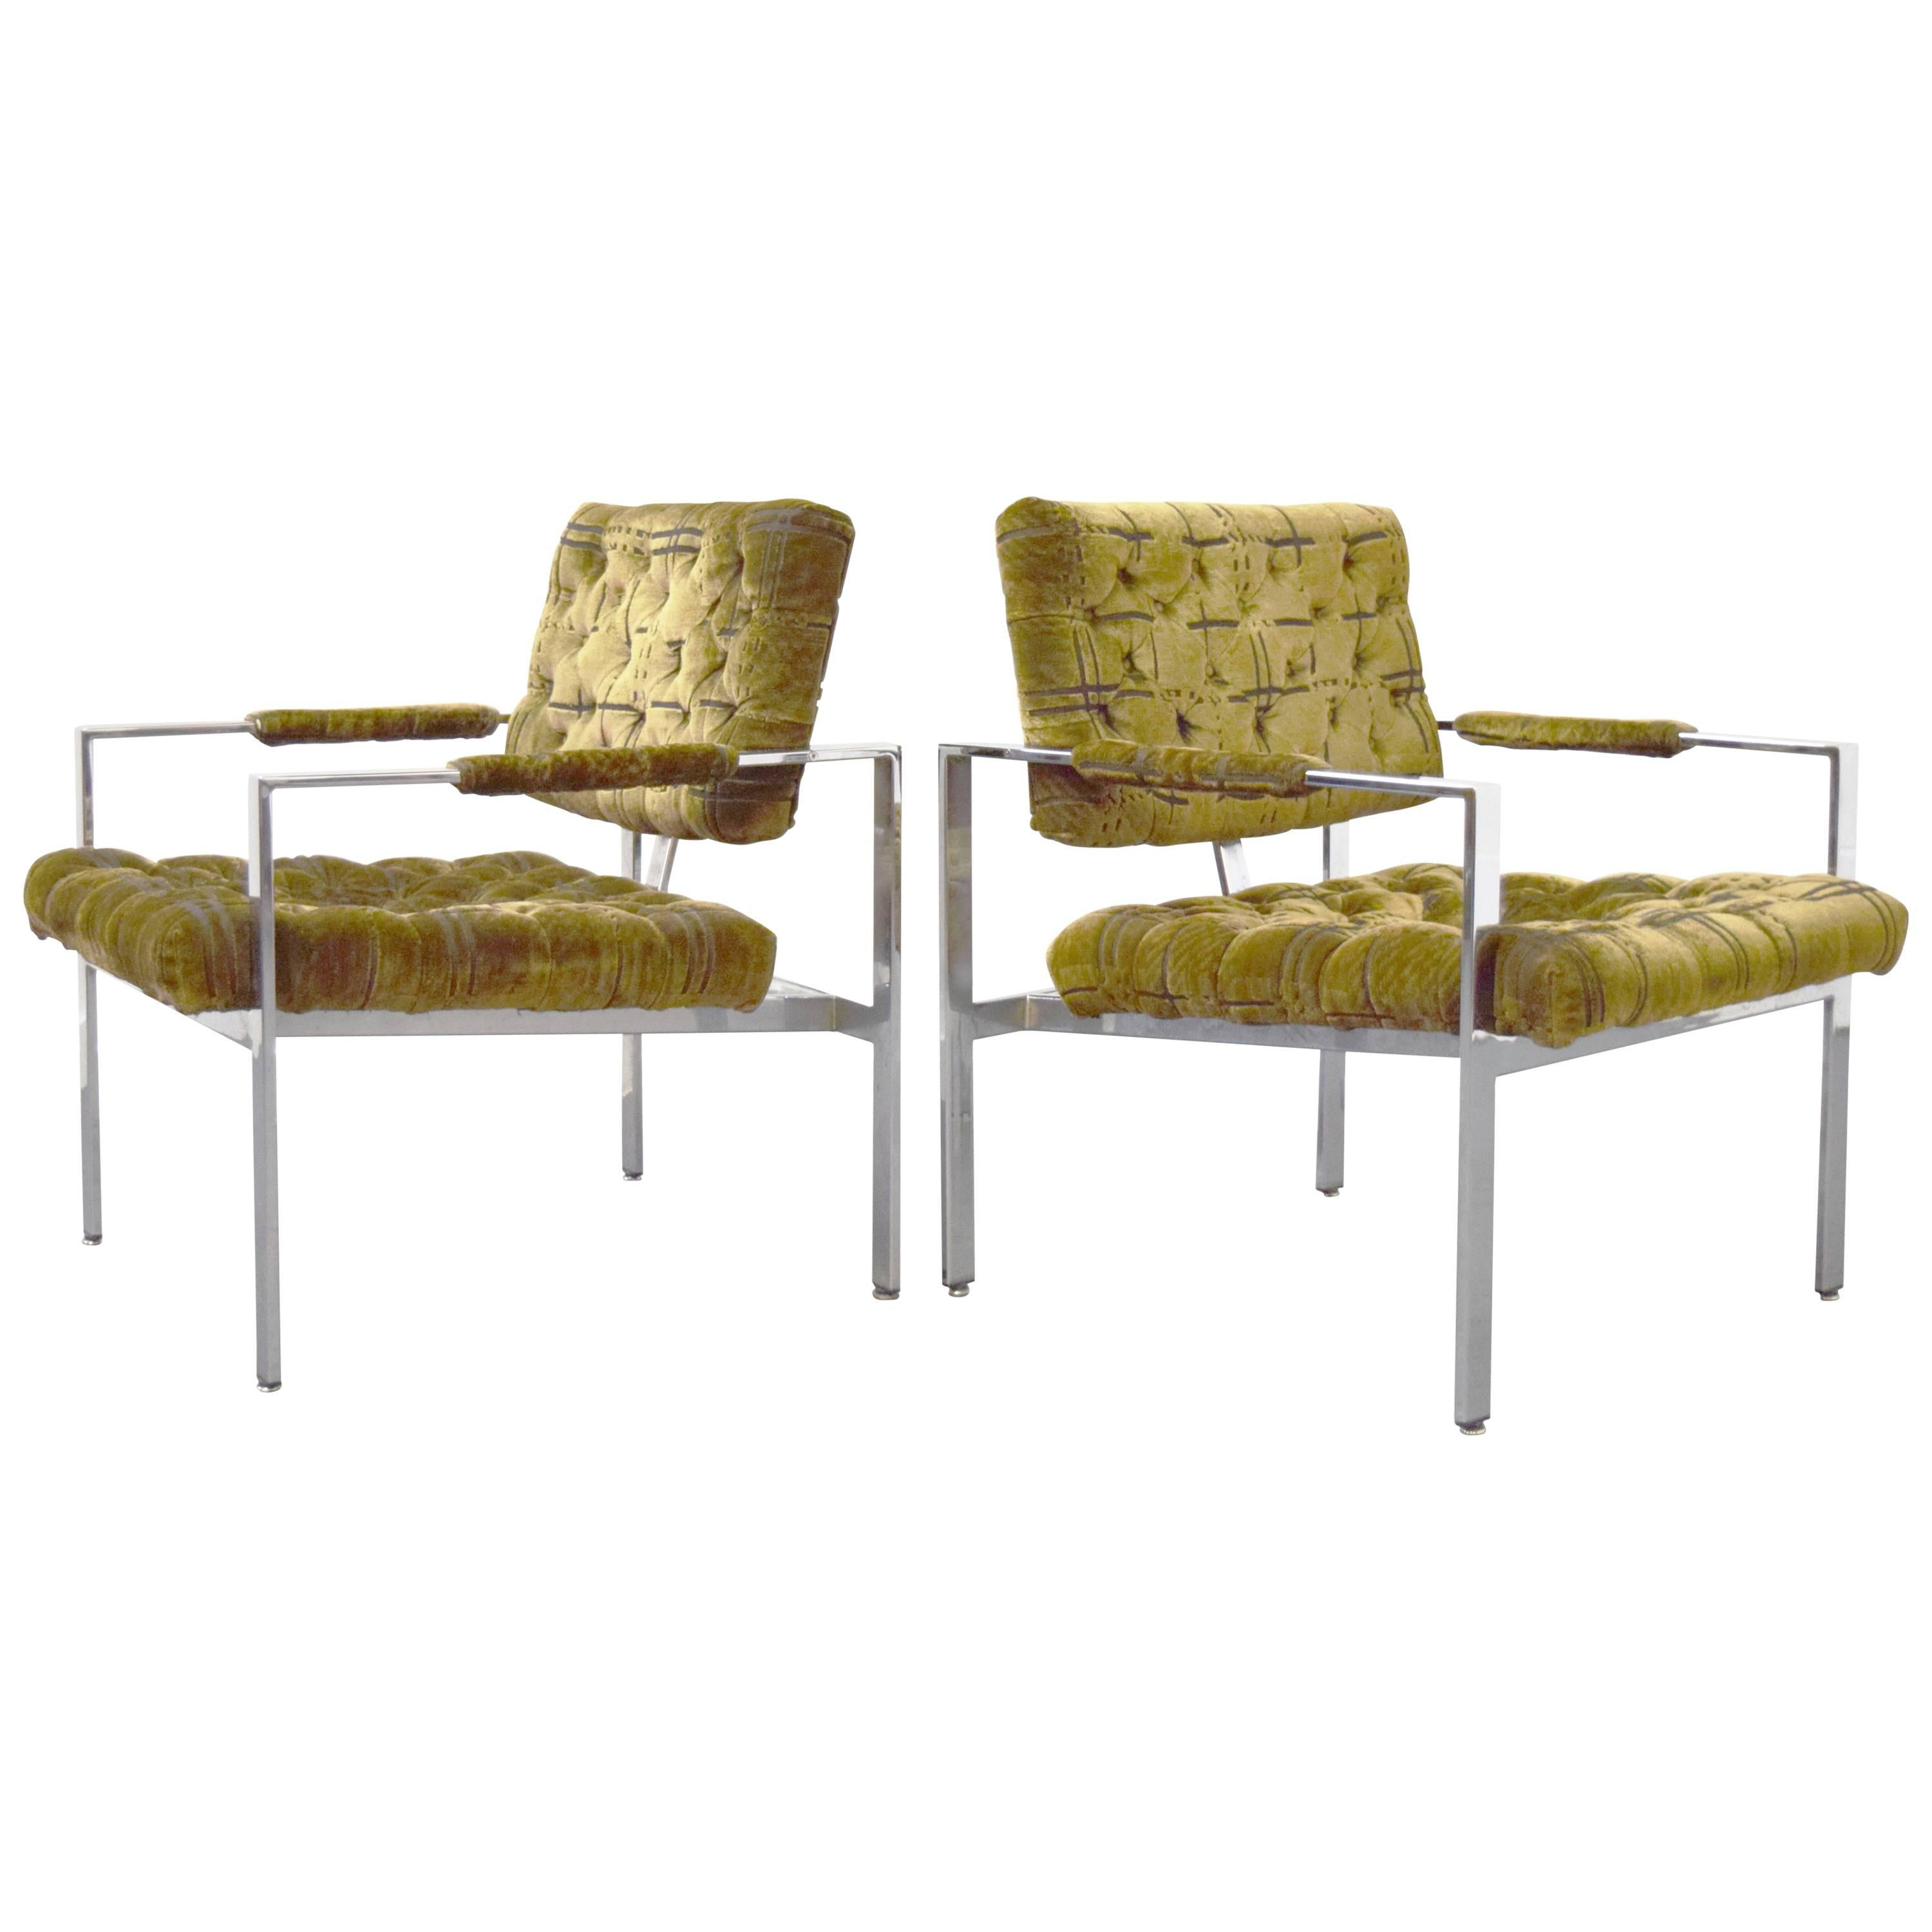 Pair of Milo Baughman for Thayer Coggin Tufted Chrome Lounge Chairs